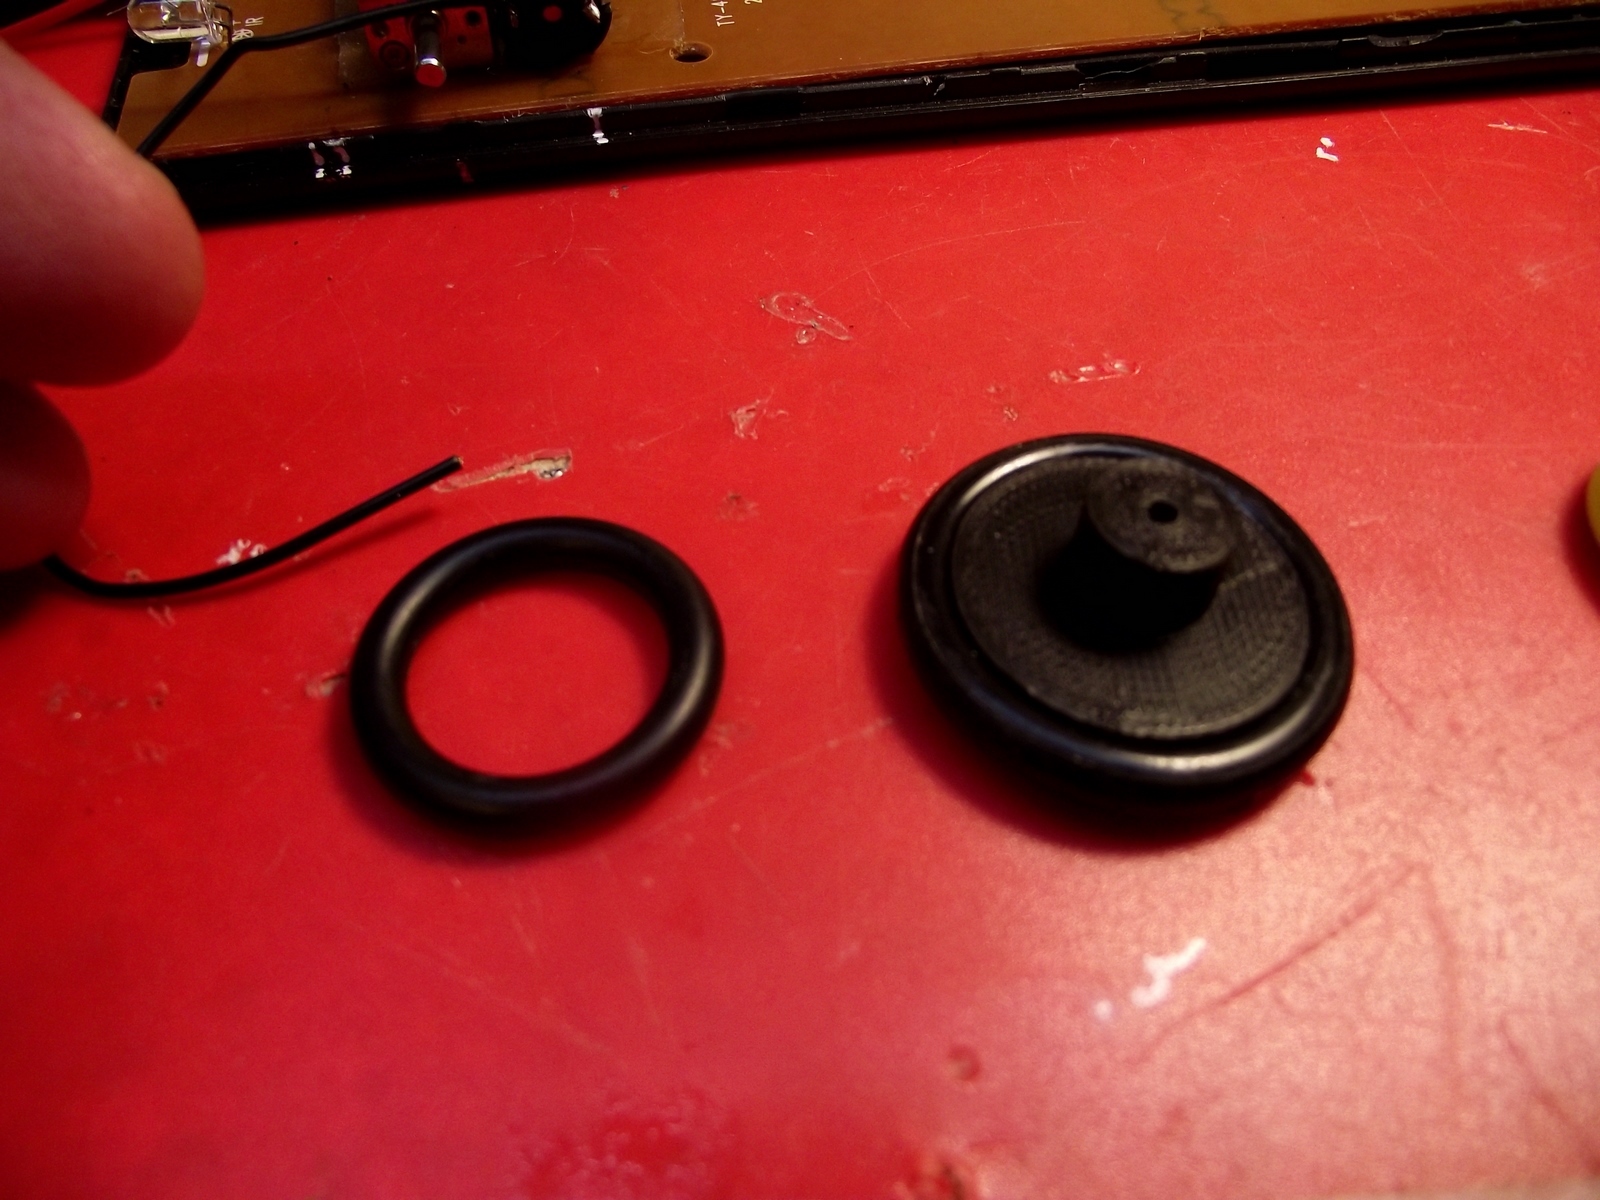 o-ring off and on the pulley